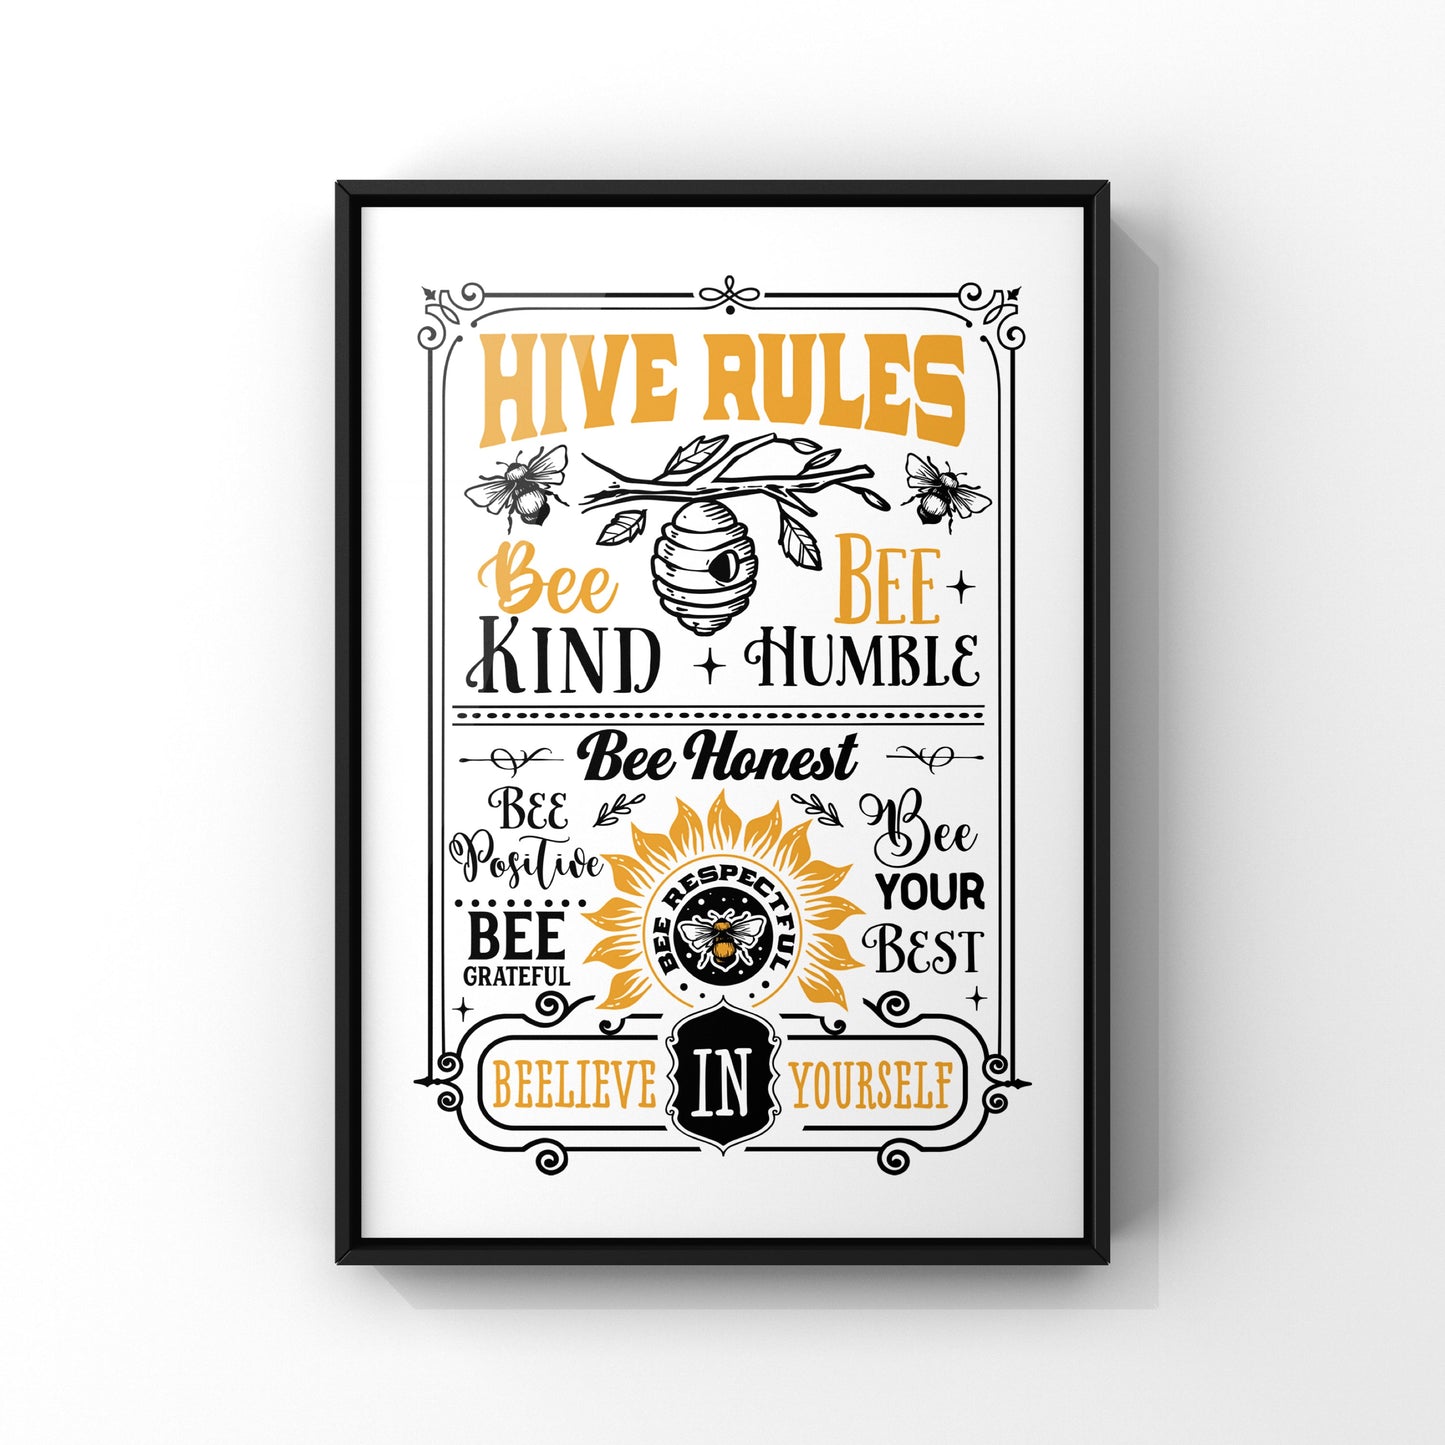 Hive rules - Yellow